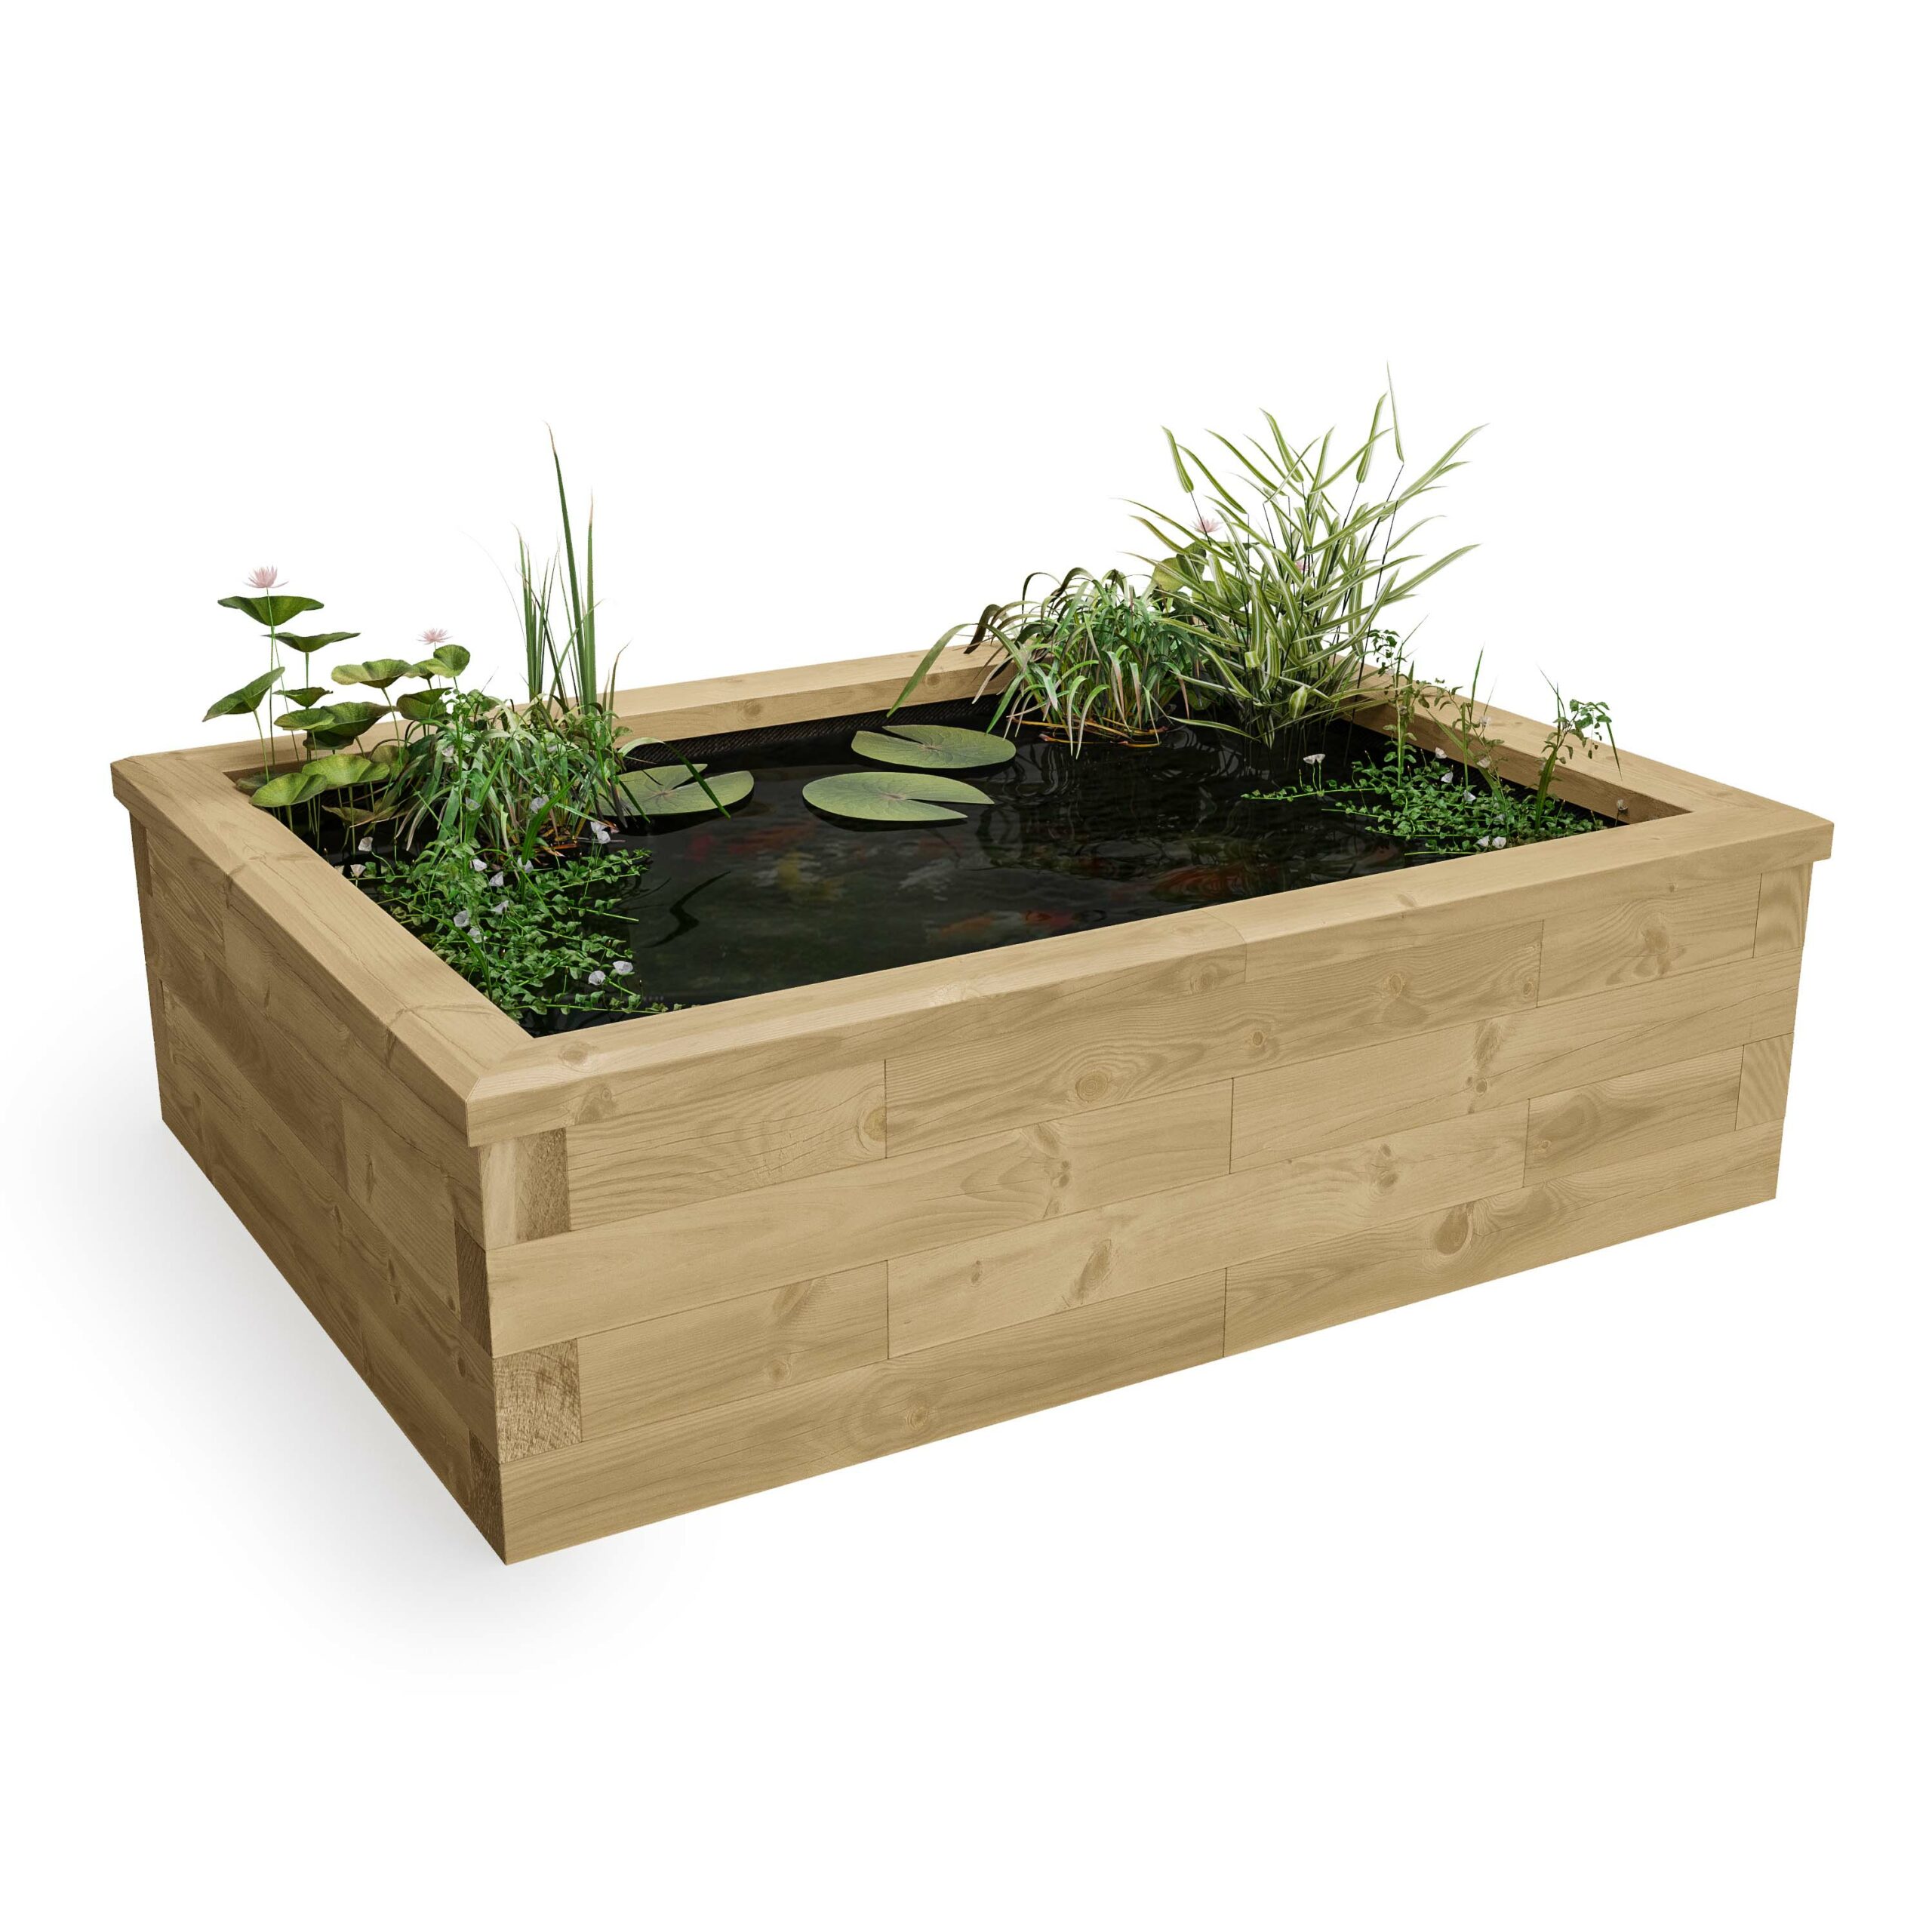 How to build a garden pond using WoodBlocX